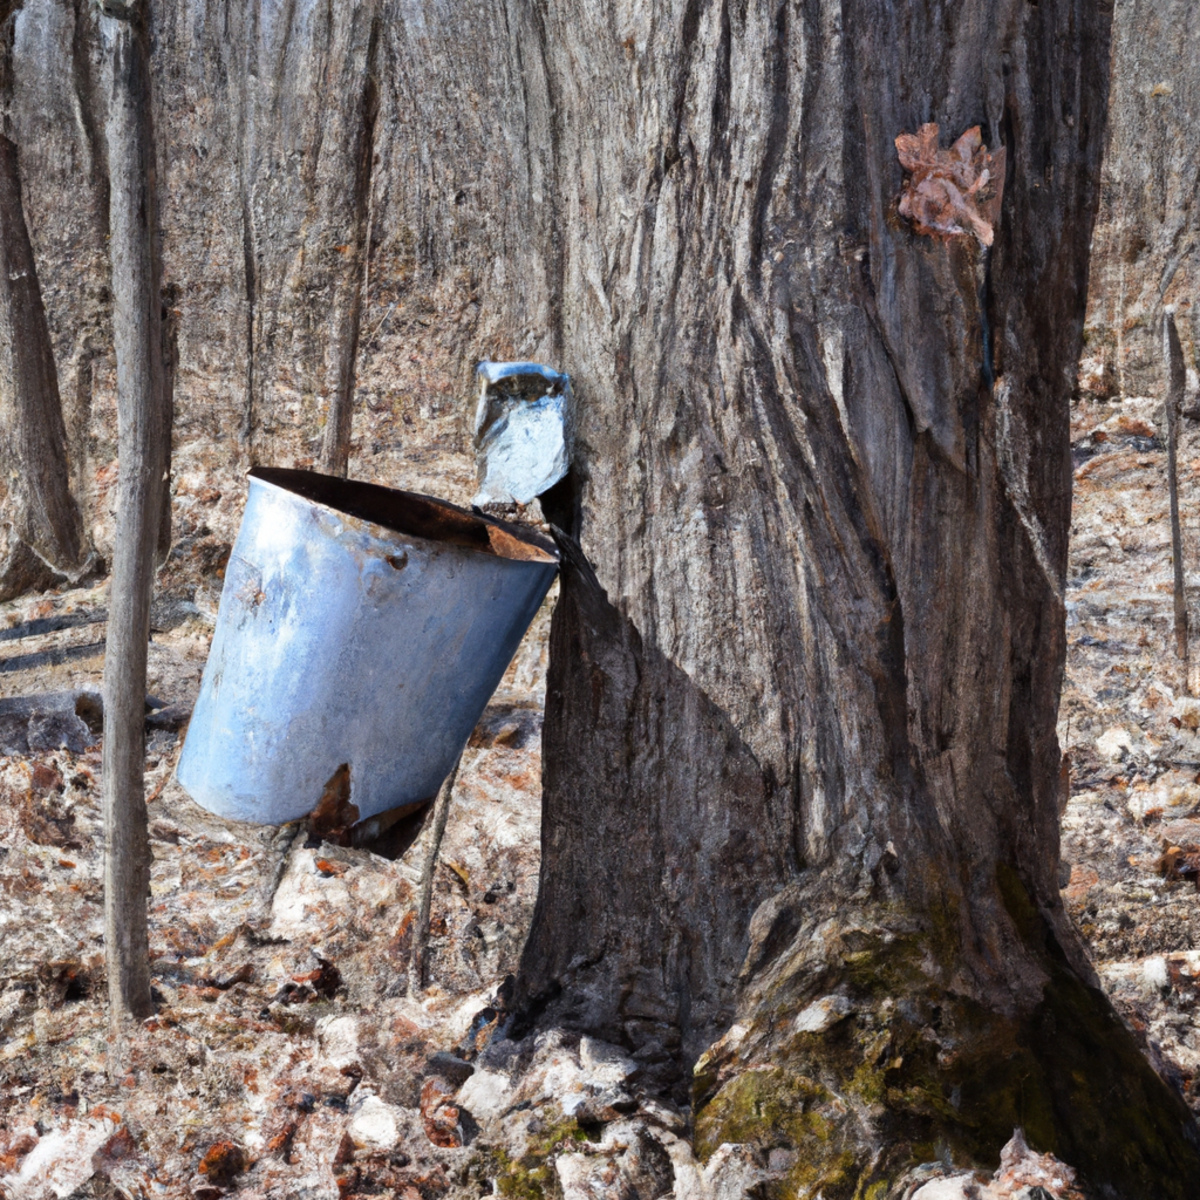 Maple tree with sap collection bucket, illustrating syrup production - Maple Syrup Urine Disease (MSUD)